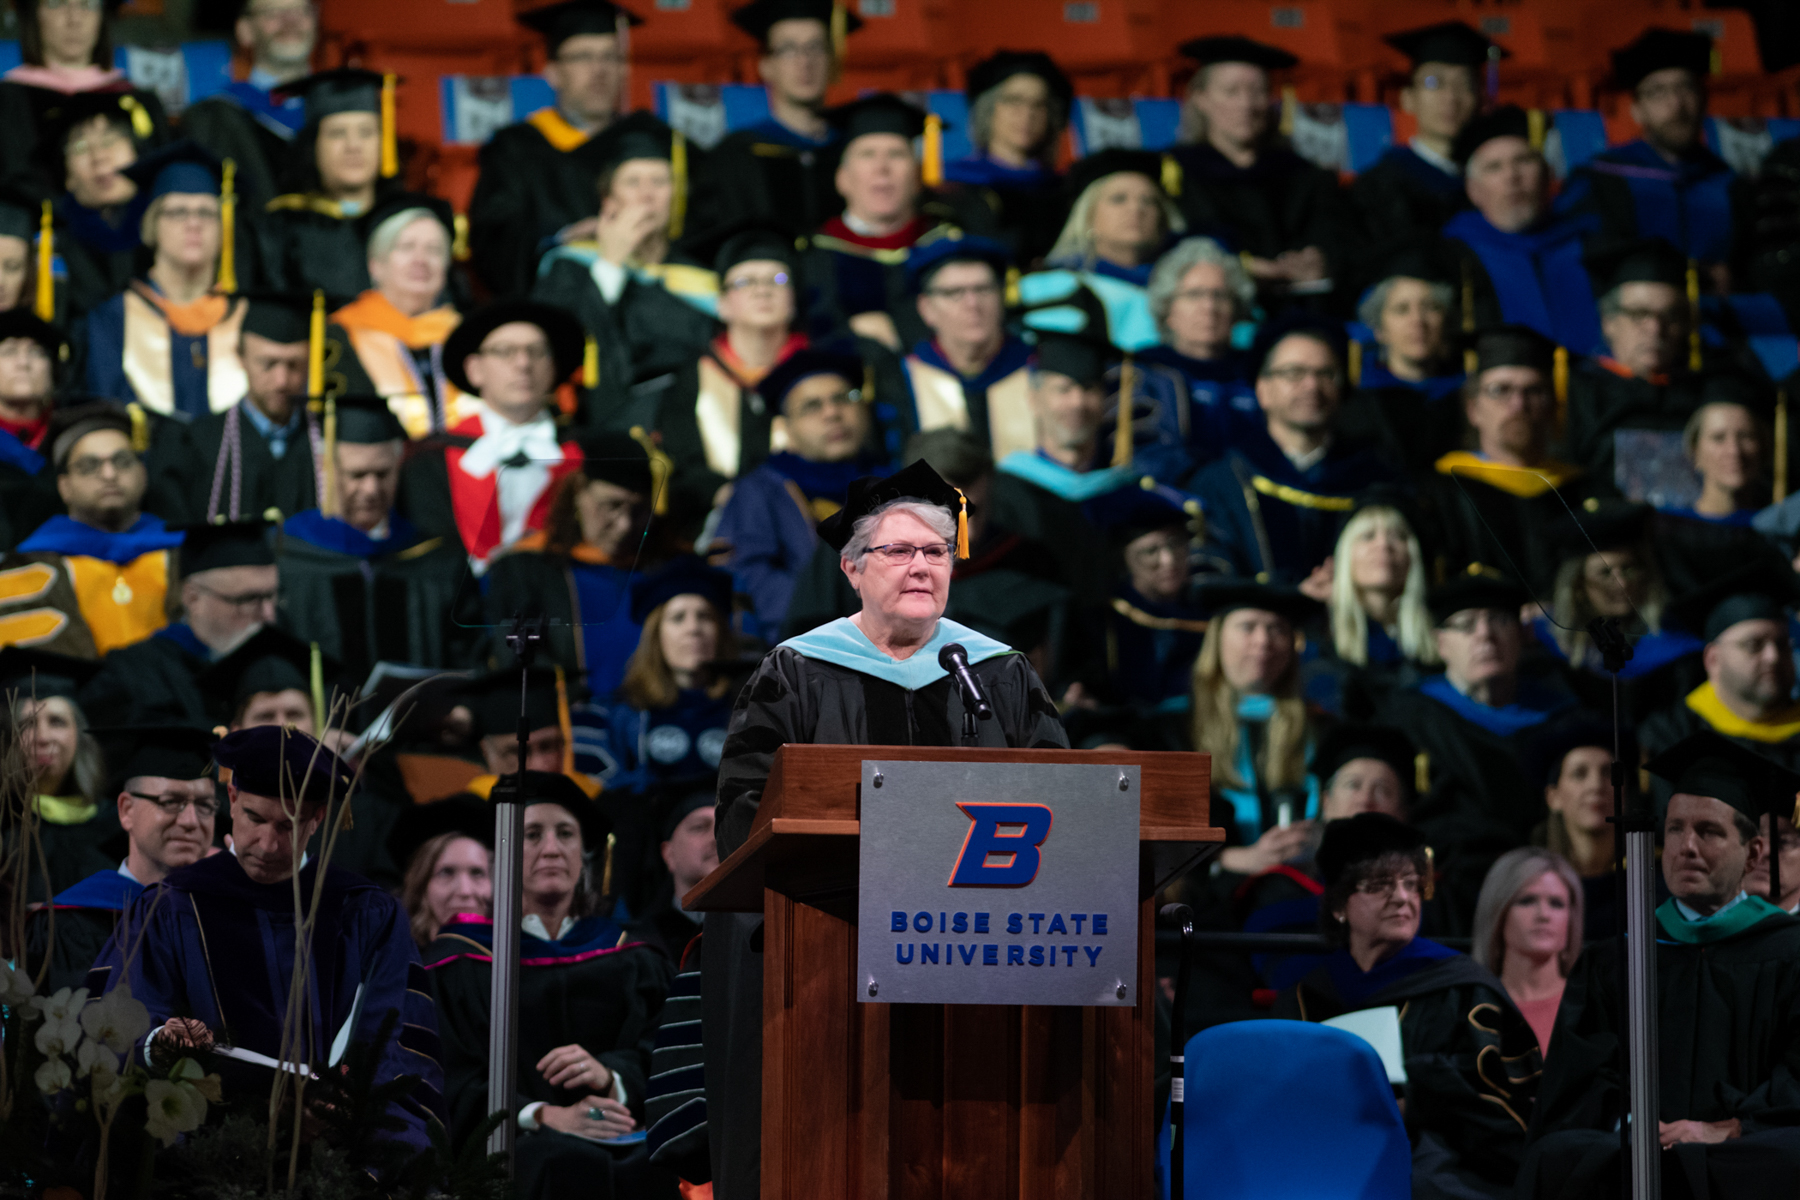 Boise State University Winter Commencement 2019, ExtraMile Arena, photo Patrick Sweeney